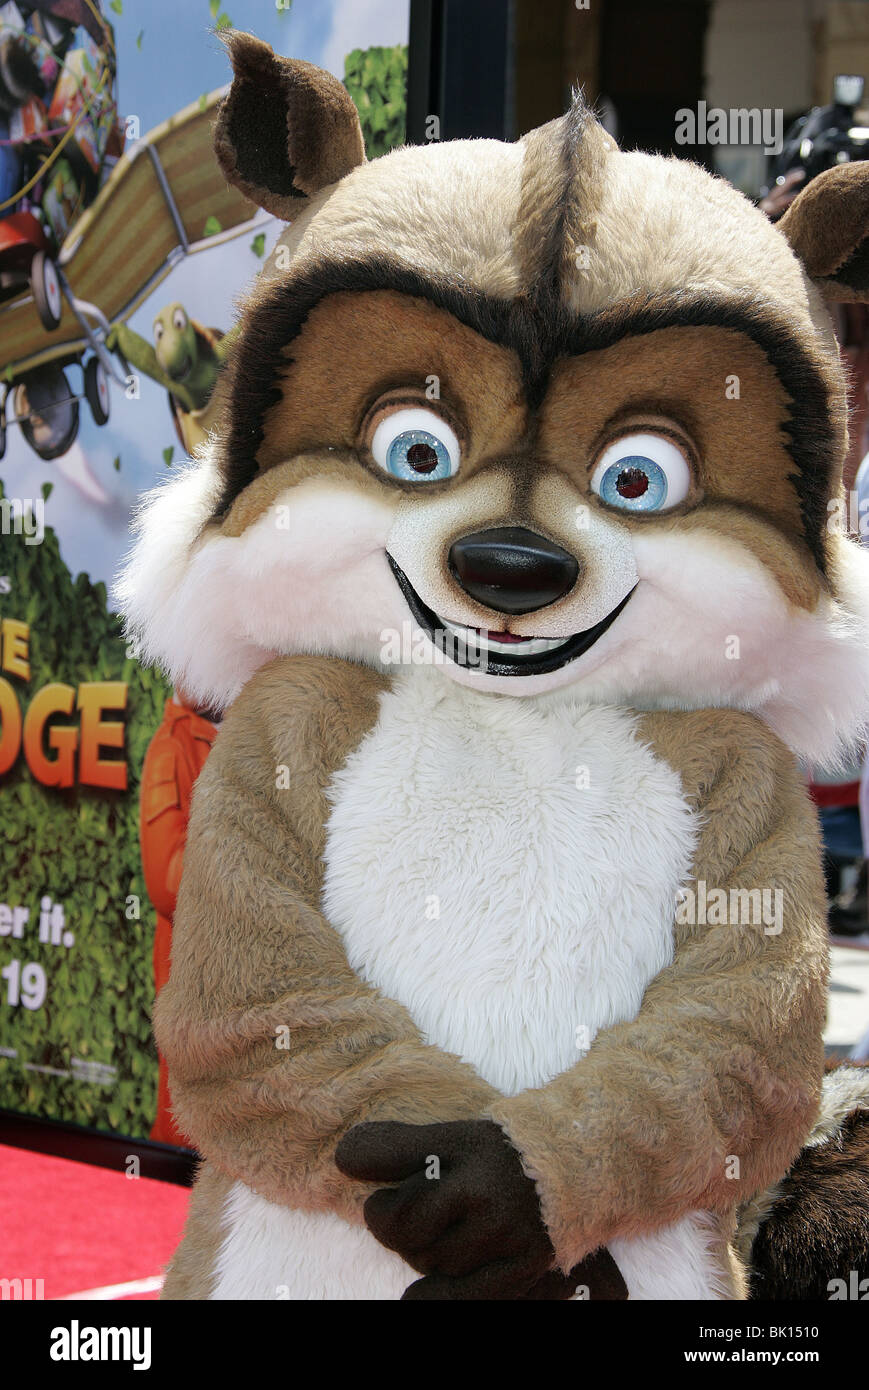 RJ THE RACCOON OVER THE HEDGE. PREMIERE WESTWOOD LOS ANGELES USA 30 April 2006 Stock Photo